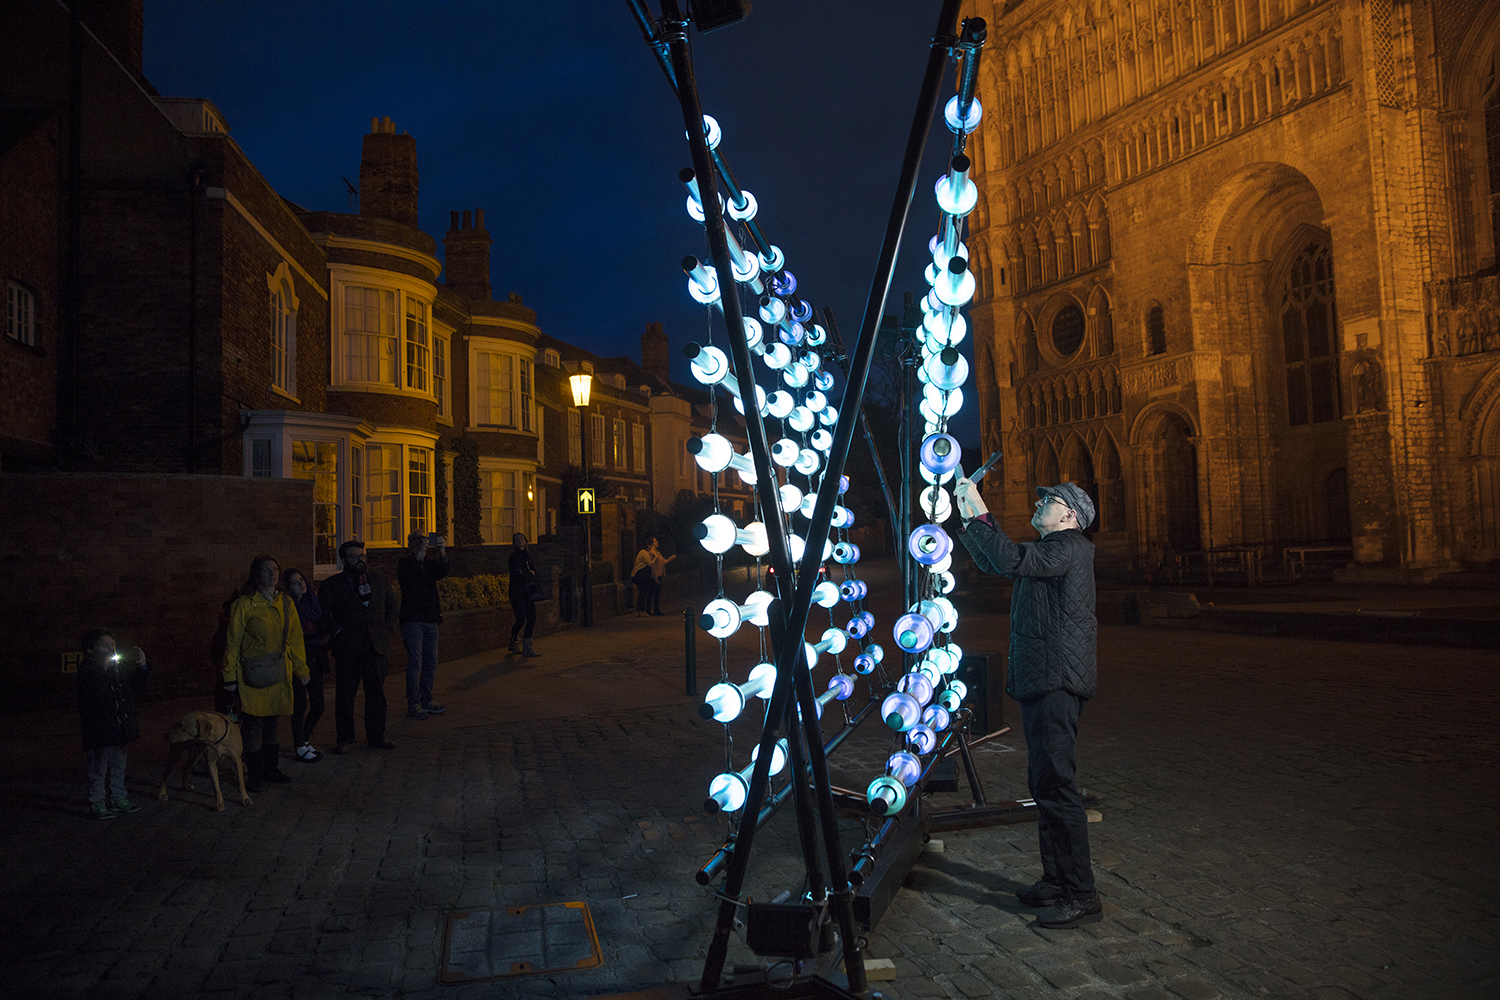 A man plays the Illumaphonium outside a church. It is a large sculpture made of glass lights and pipes which he is hitting with special sticks.